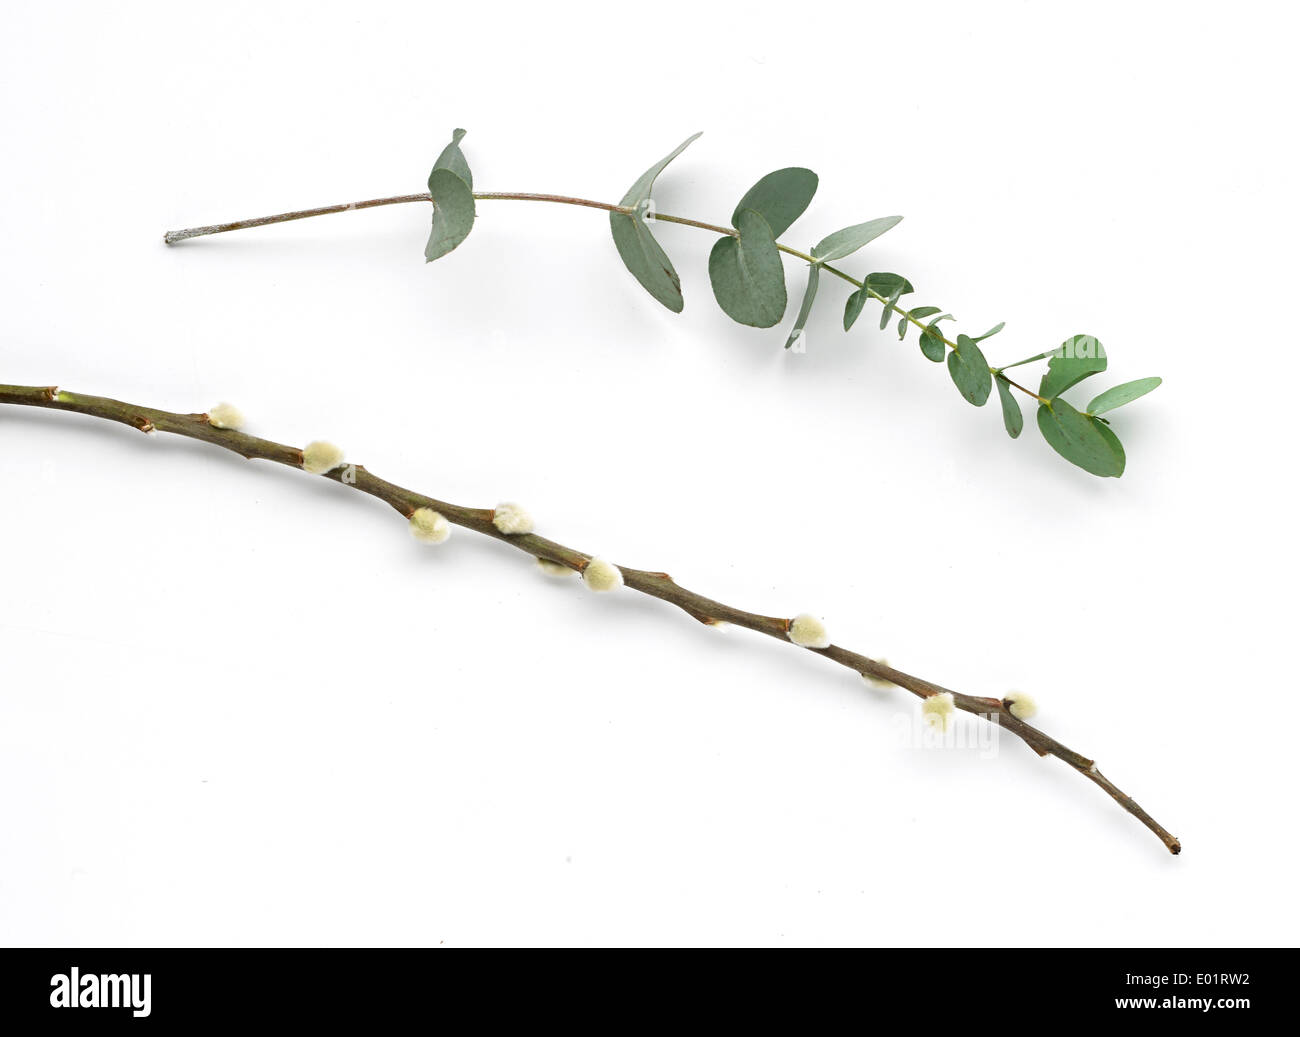 Leafy stem and thin budding branch Stock Photo